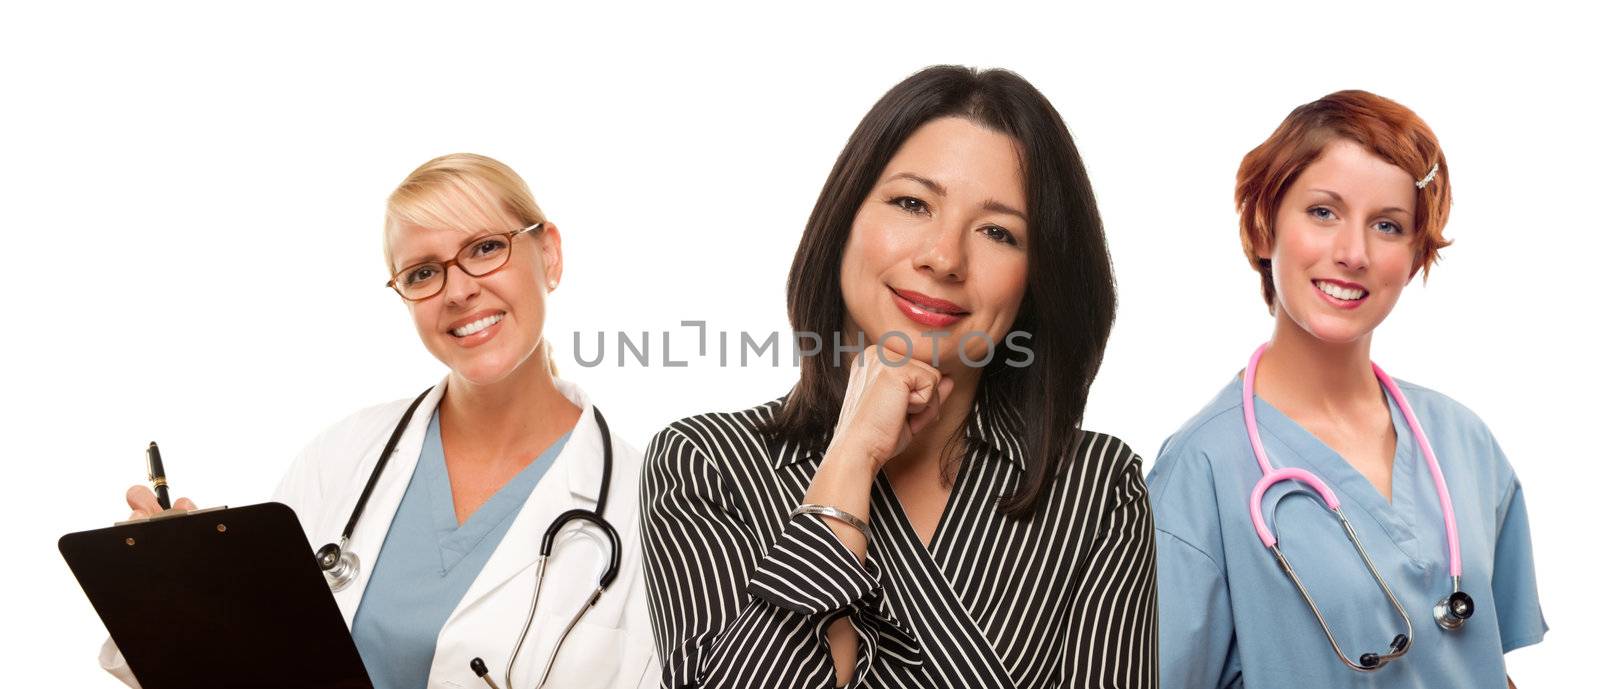 Attractive Hispanic Woman with Female Doctors and Nurses Isolated on a White Background.